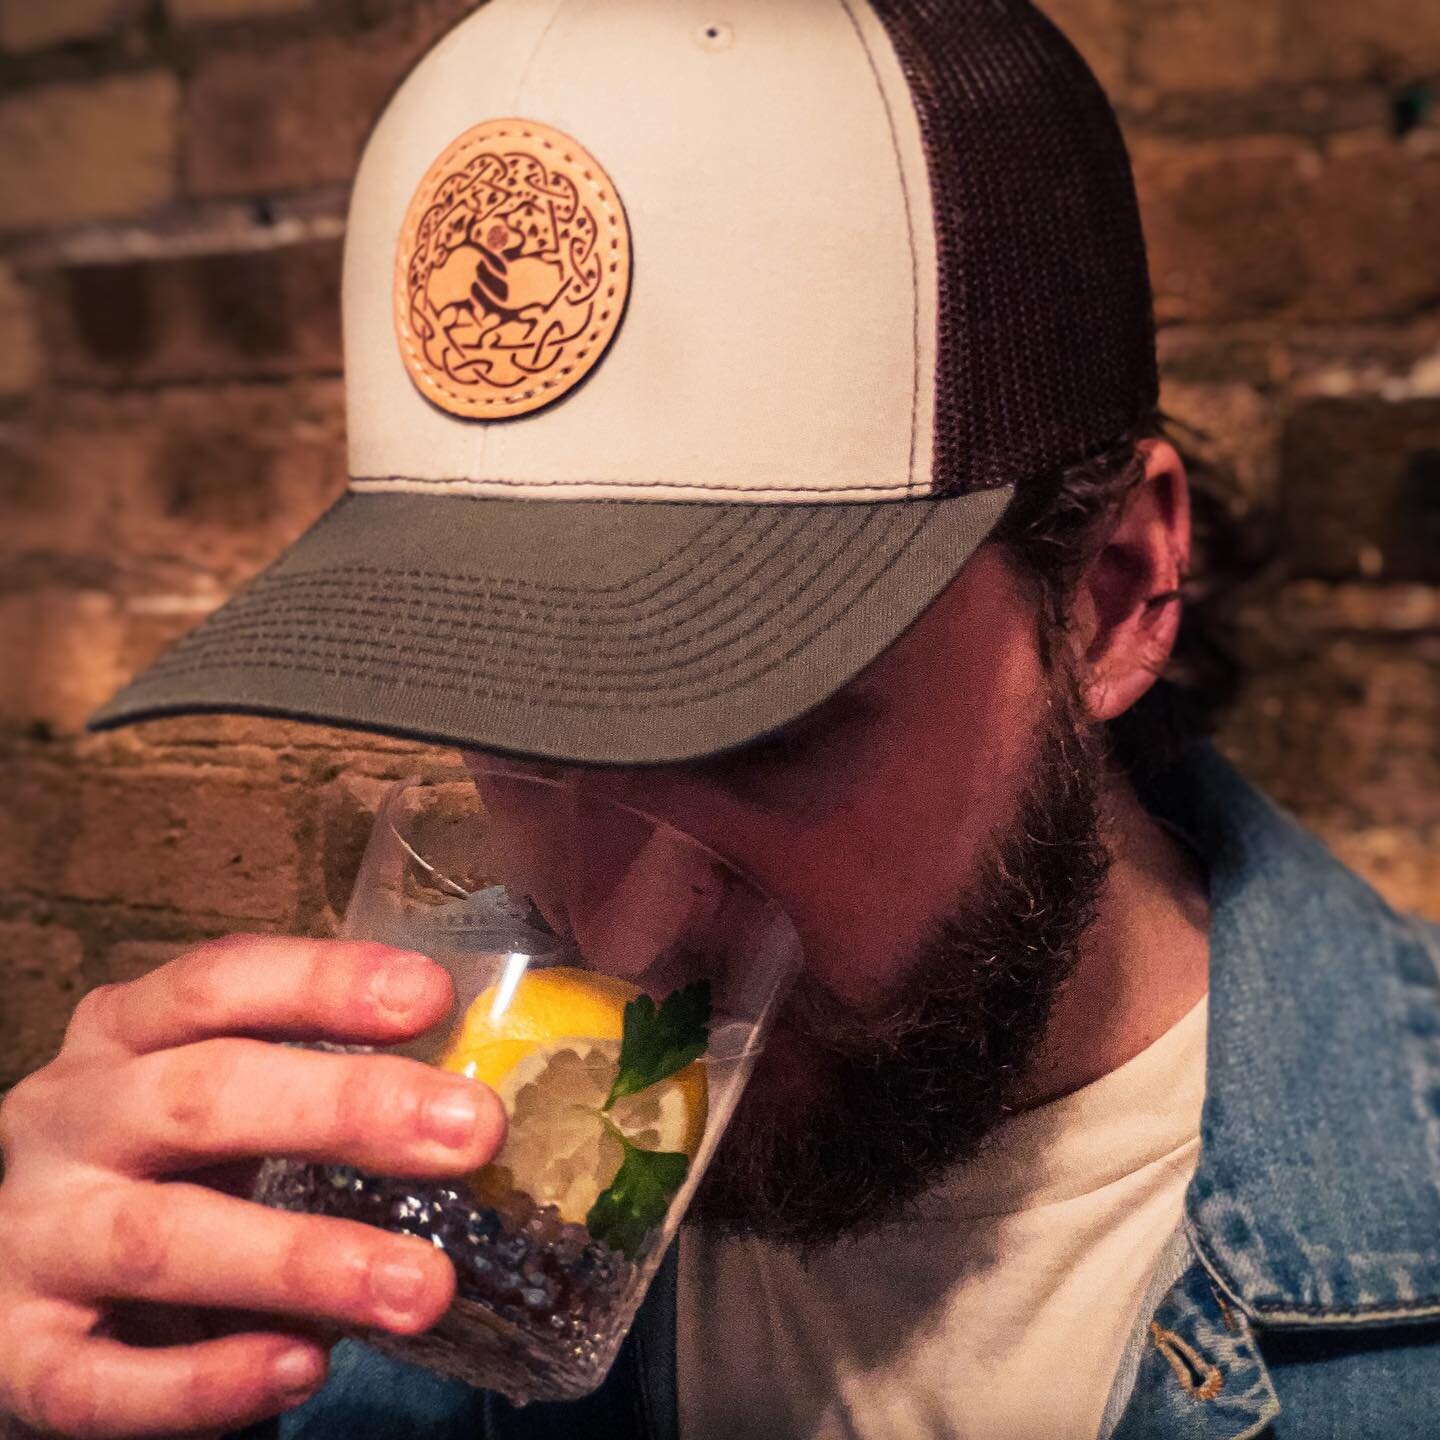 Cheers to Friday. We have a limited amount of these Silver Tree leather patch hats for $20. Message to claim one. 
&bull;
&bull;
&bull;
&bull;
#illinois #centralillinois #illinoisspirits  #illinoisvodka #illinoiscraft #localspirits #localvodka #craft